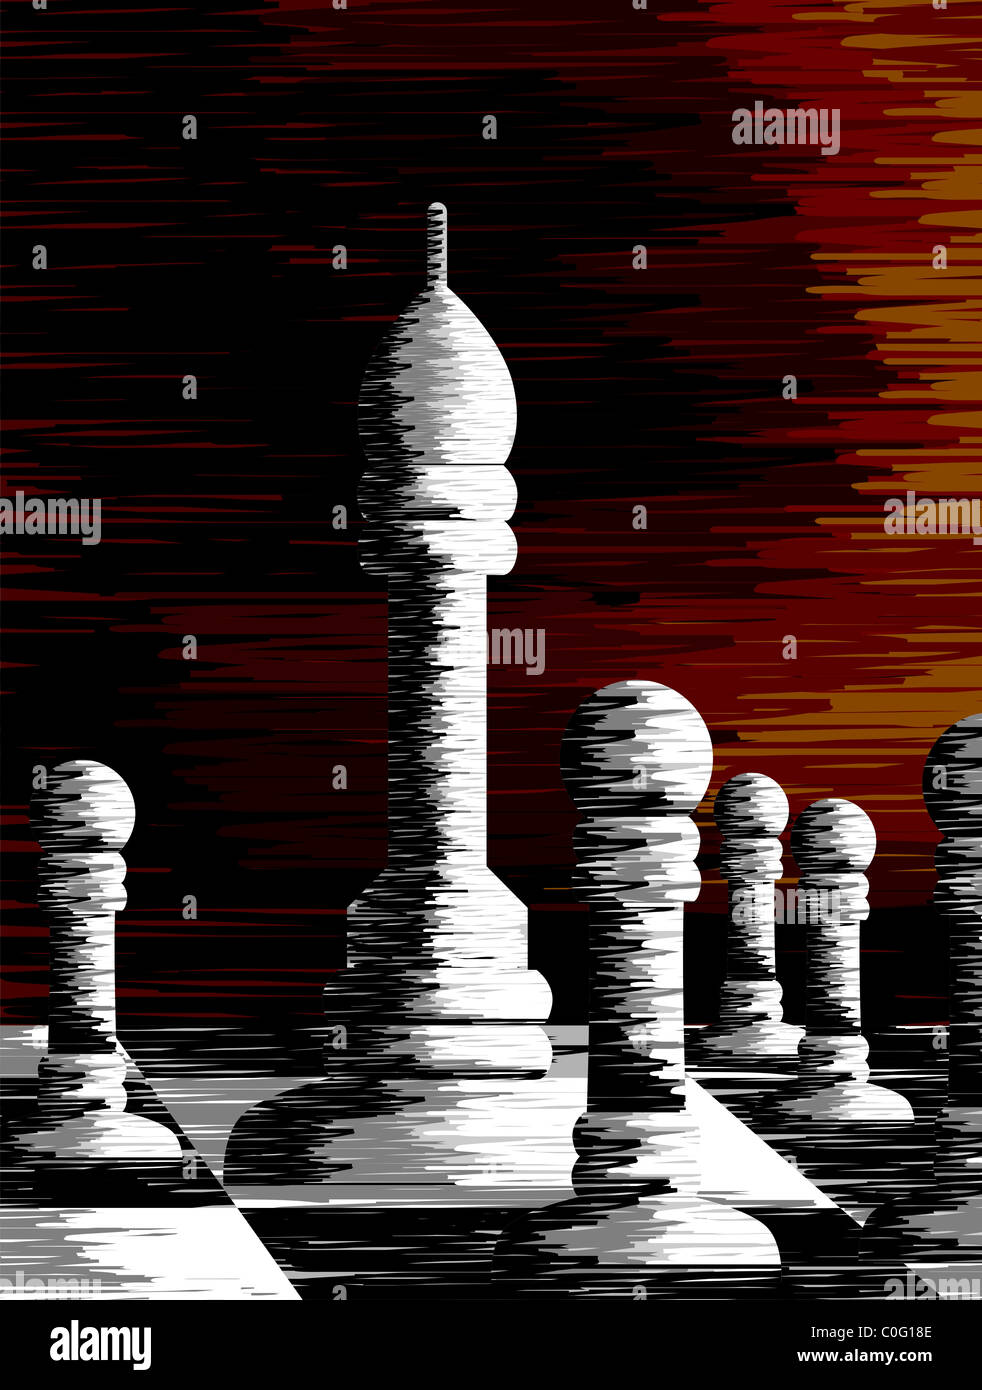 Digital painting of chess canvas. The artist feels the sense of power and reign. Stock Photo